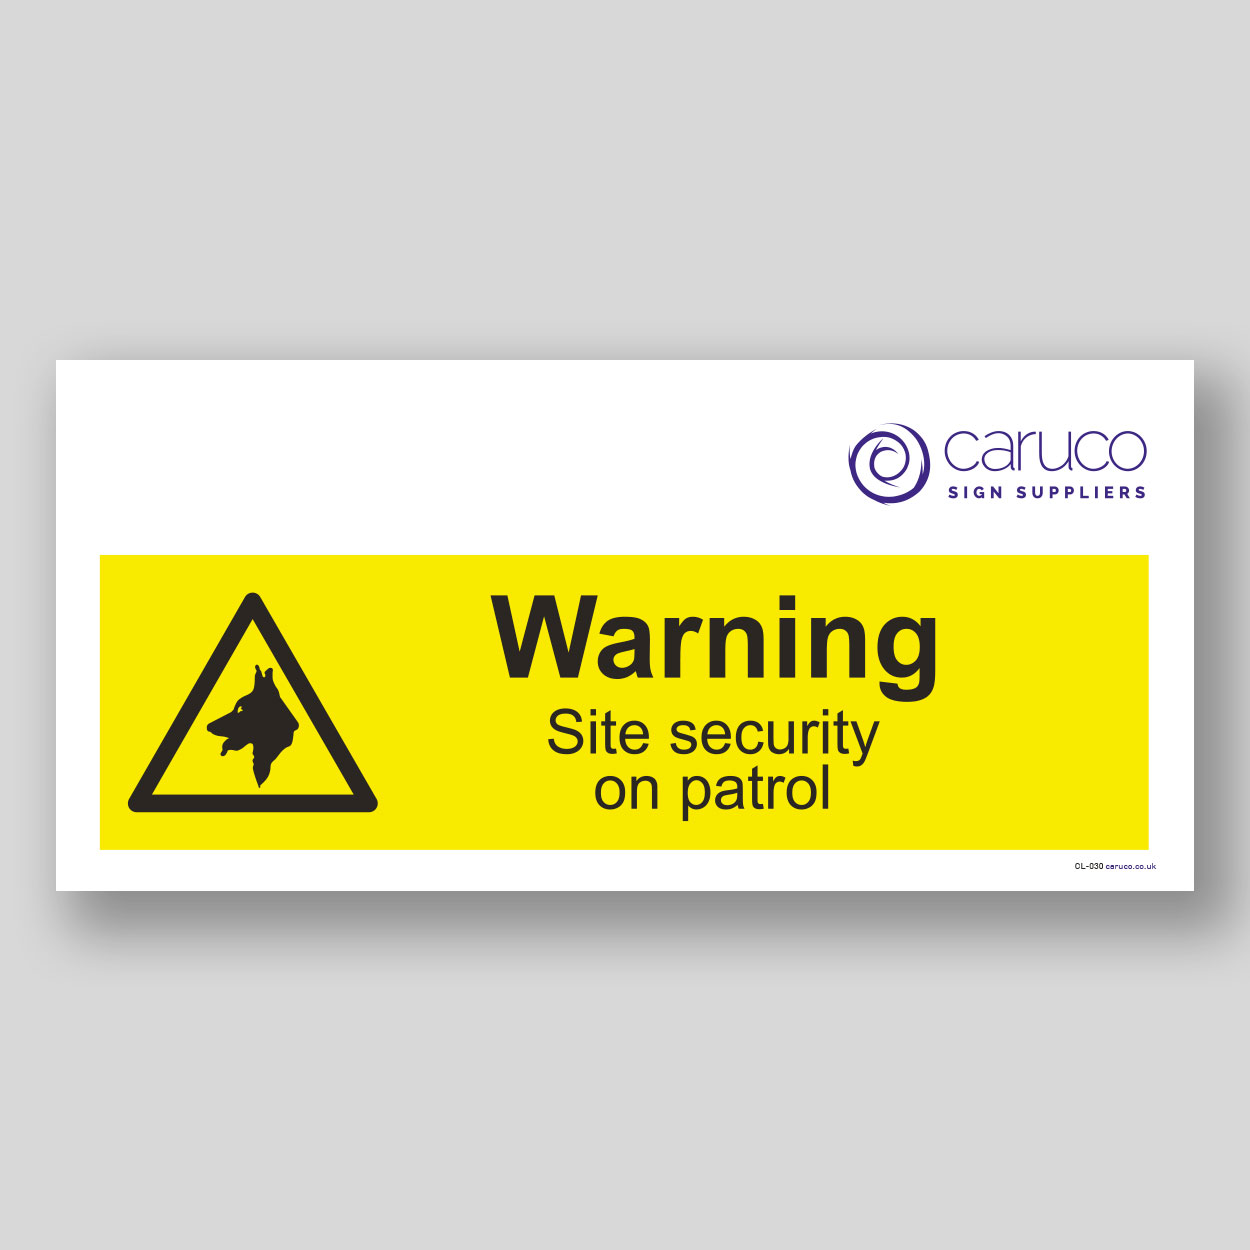 CL-030 Warning - site security